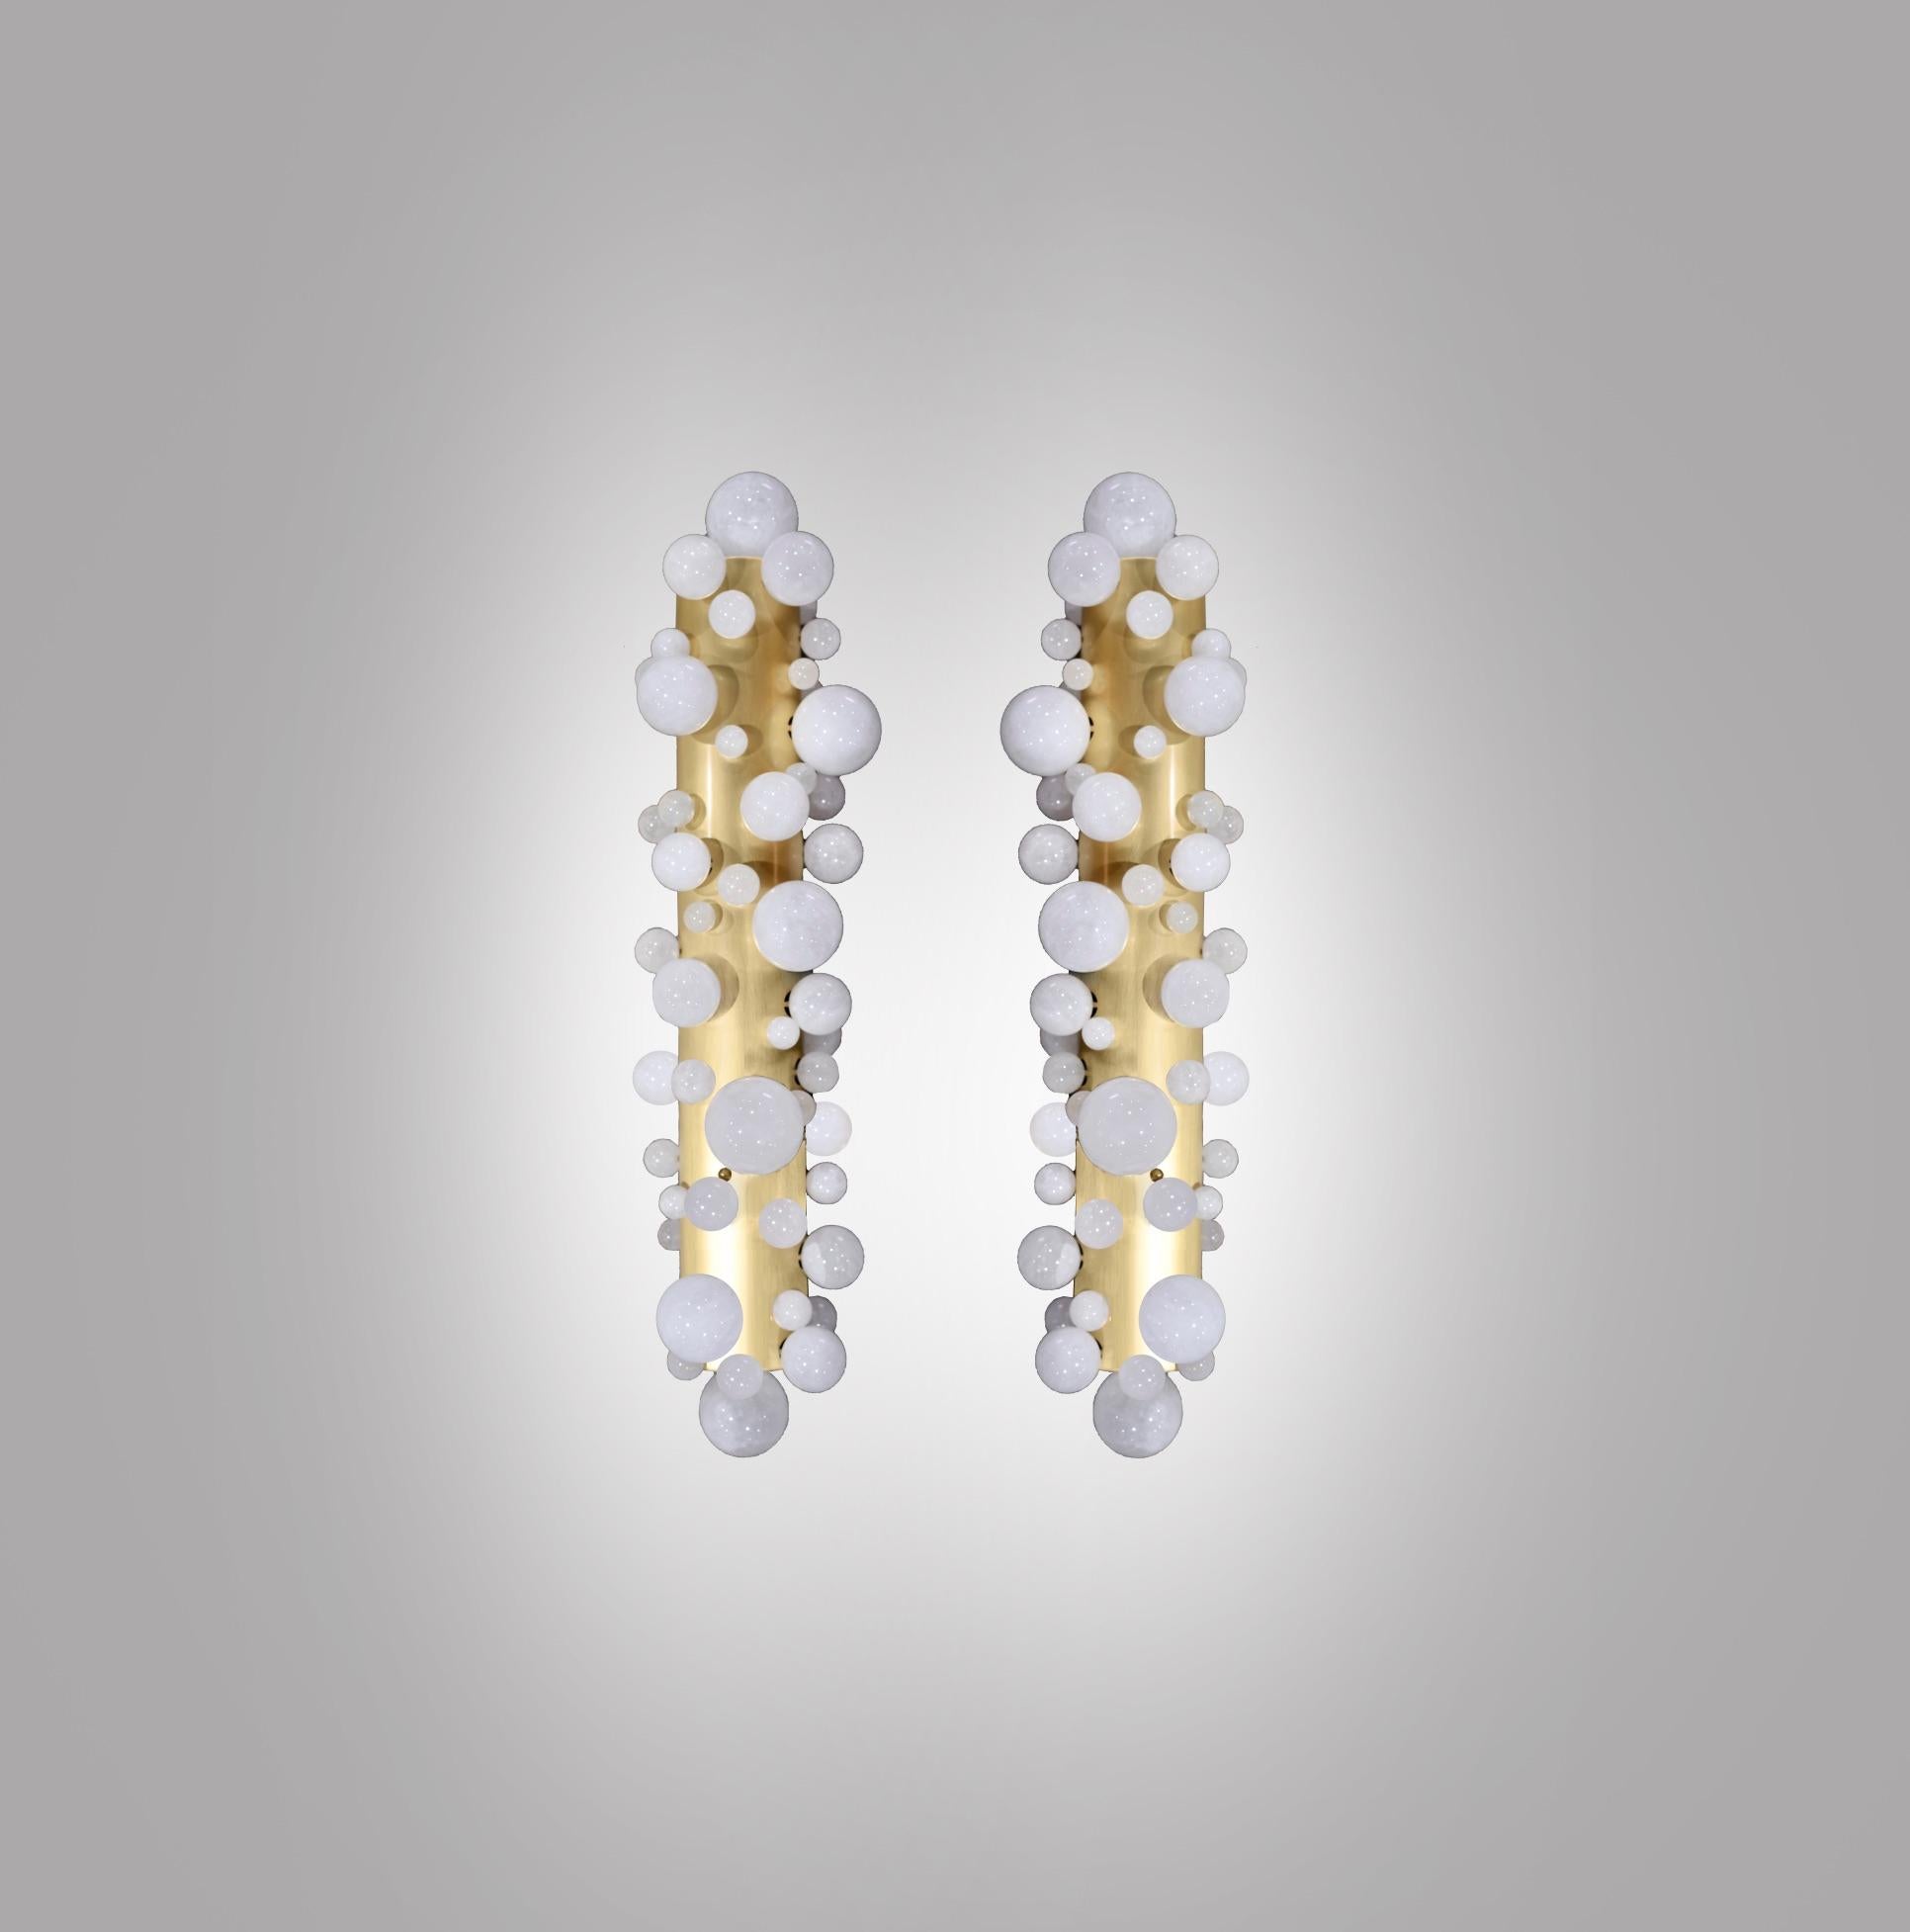 Pair of bubble rock crystal sconces with the matte brass finishes. Created by Phoenix Gallery, NYC.
Each sconce installed four sockets. Use four 60w LED warm light bulbs. Total 240w max. Light bulbs included.
Custom size upon request.
Recommend